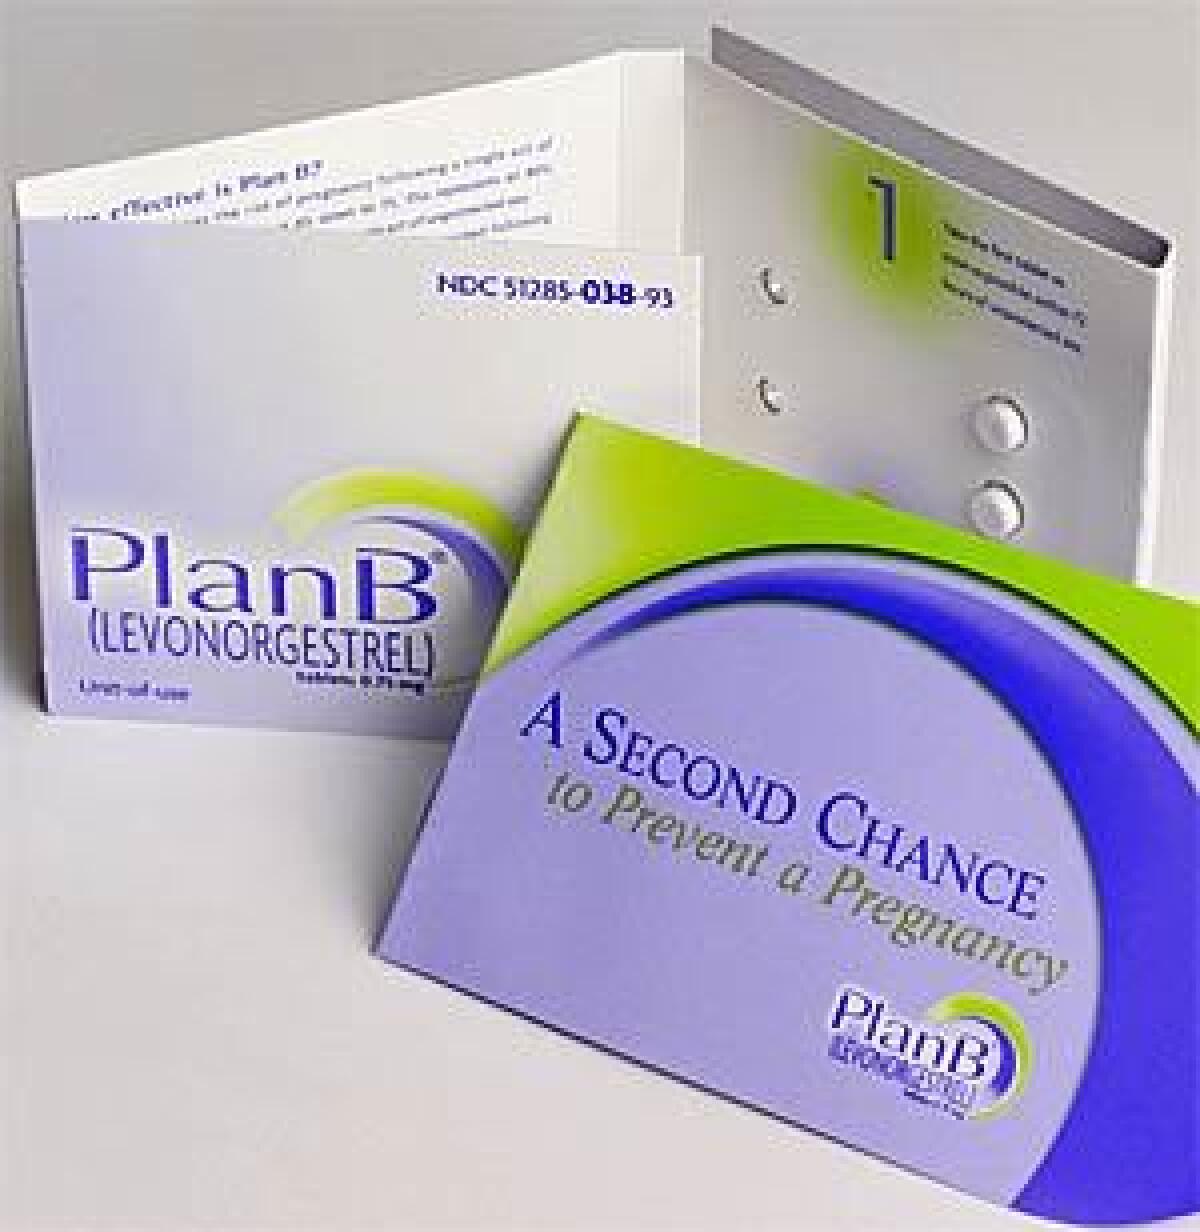 Plan B works largely by preventing ovulation.